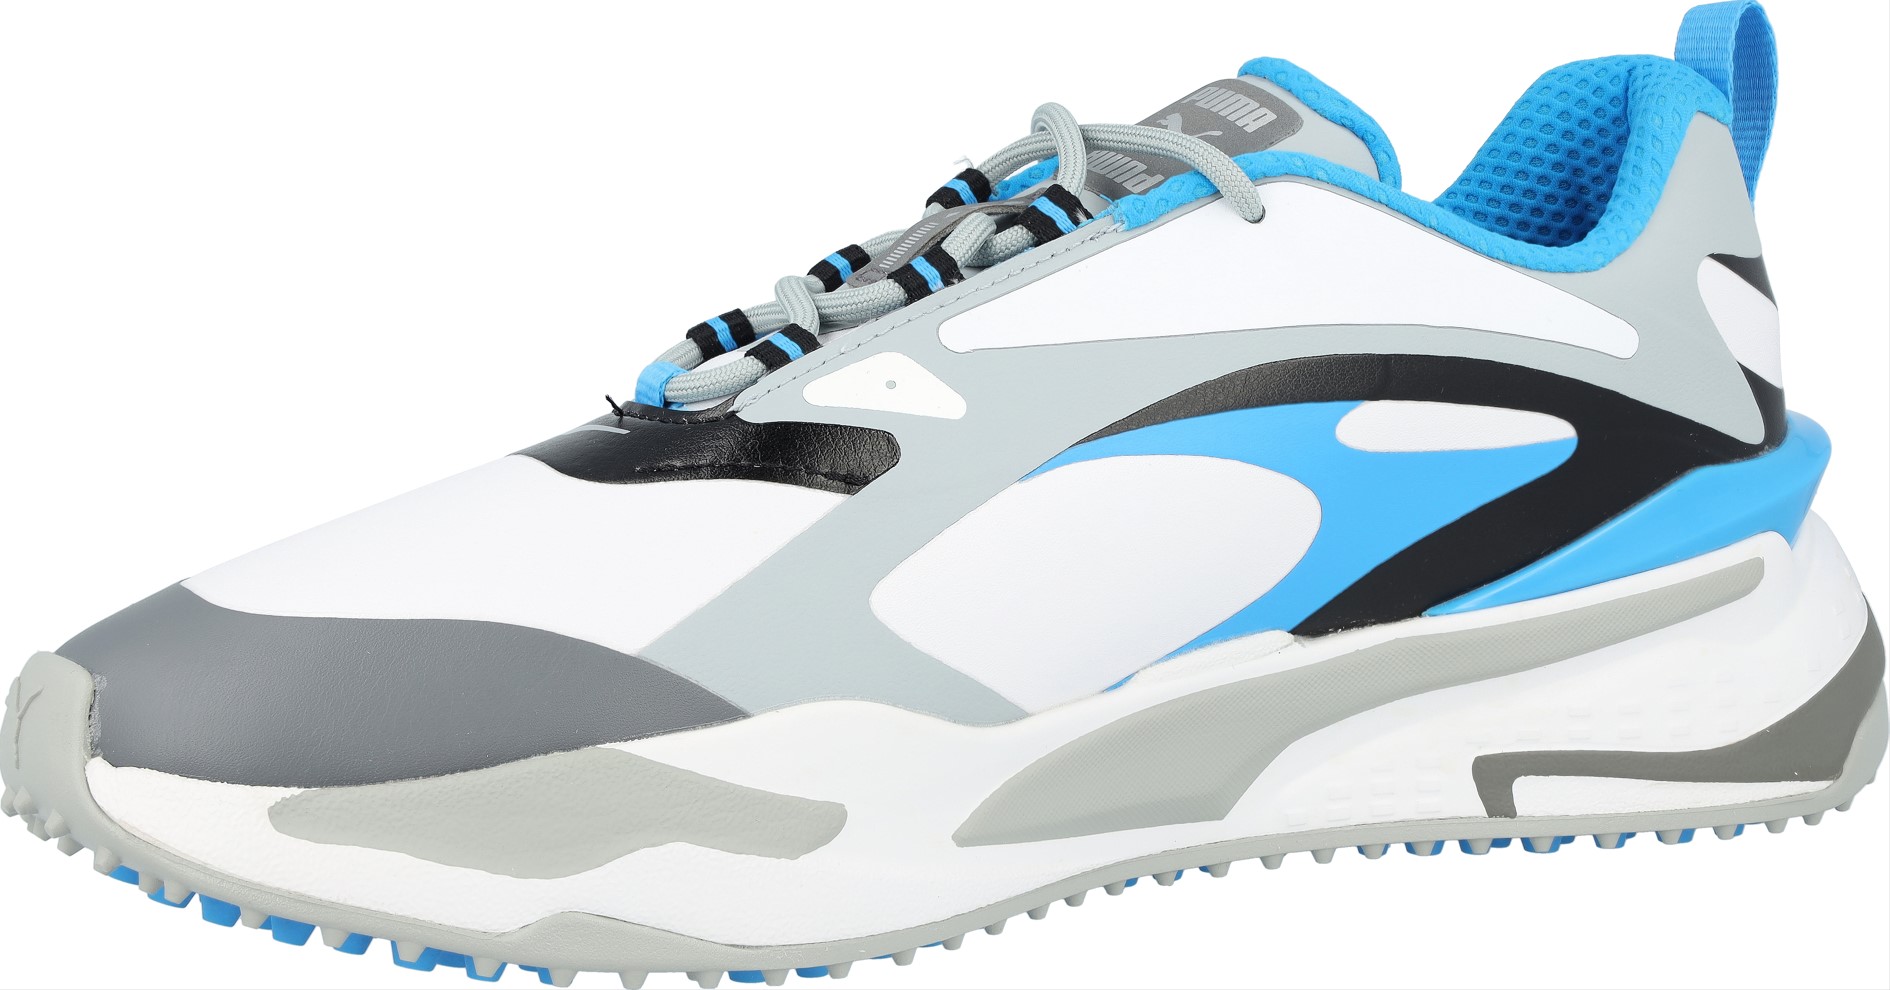 Puma GS Fast 376357-01 Size 10.5 Medium Spikeless Golf Shoes - image 4 of 8